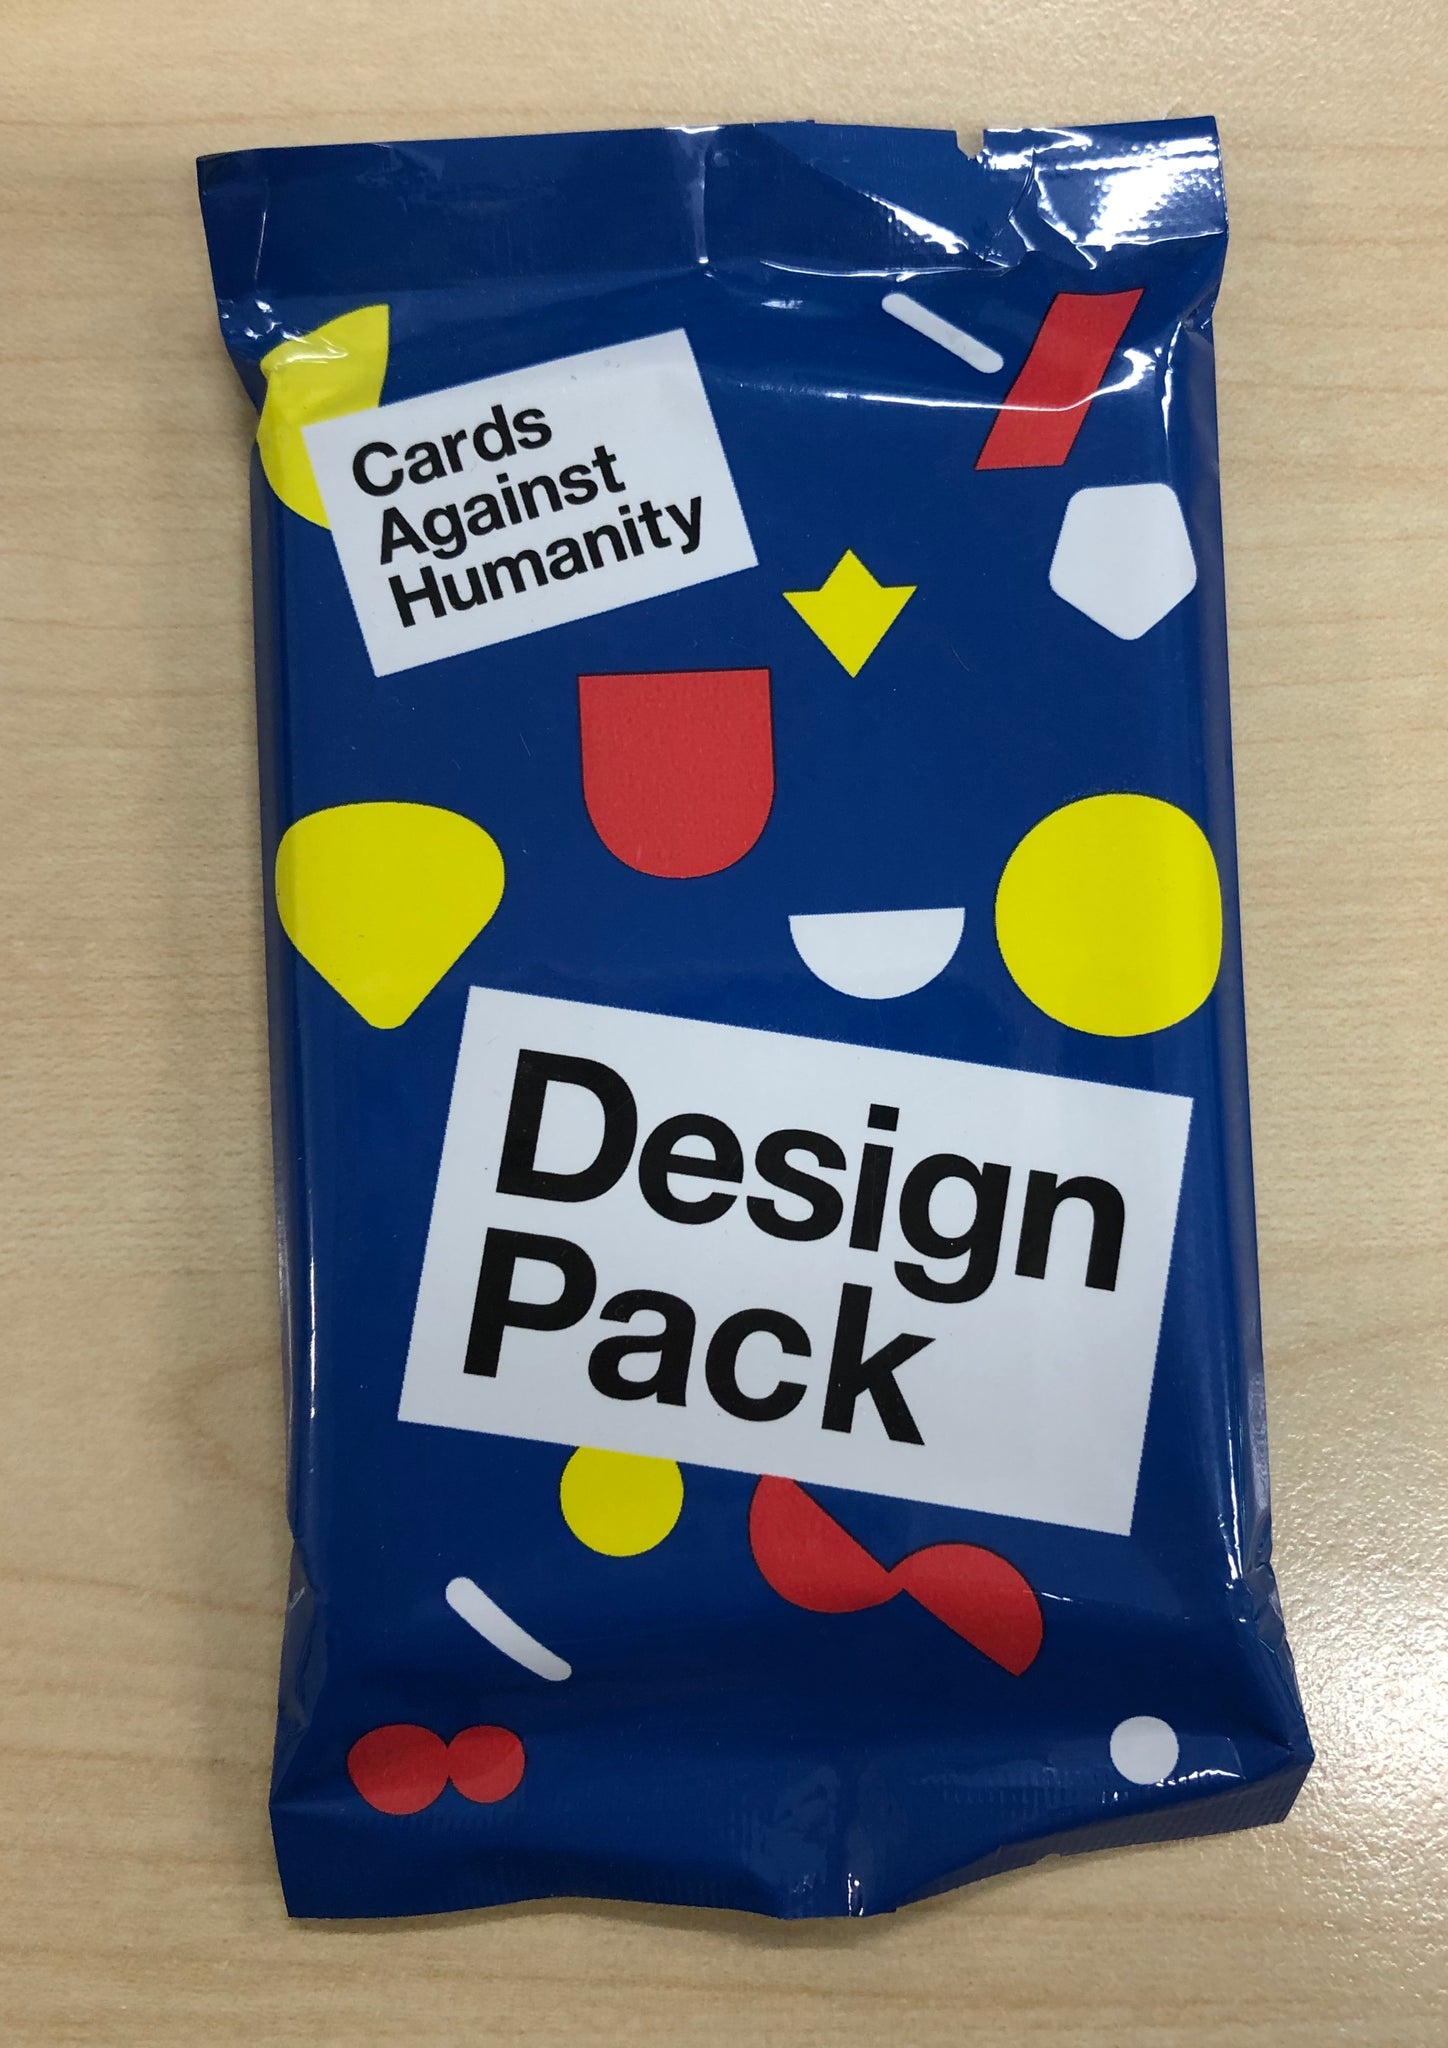 Cards Against Humanity add on pack